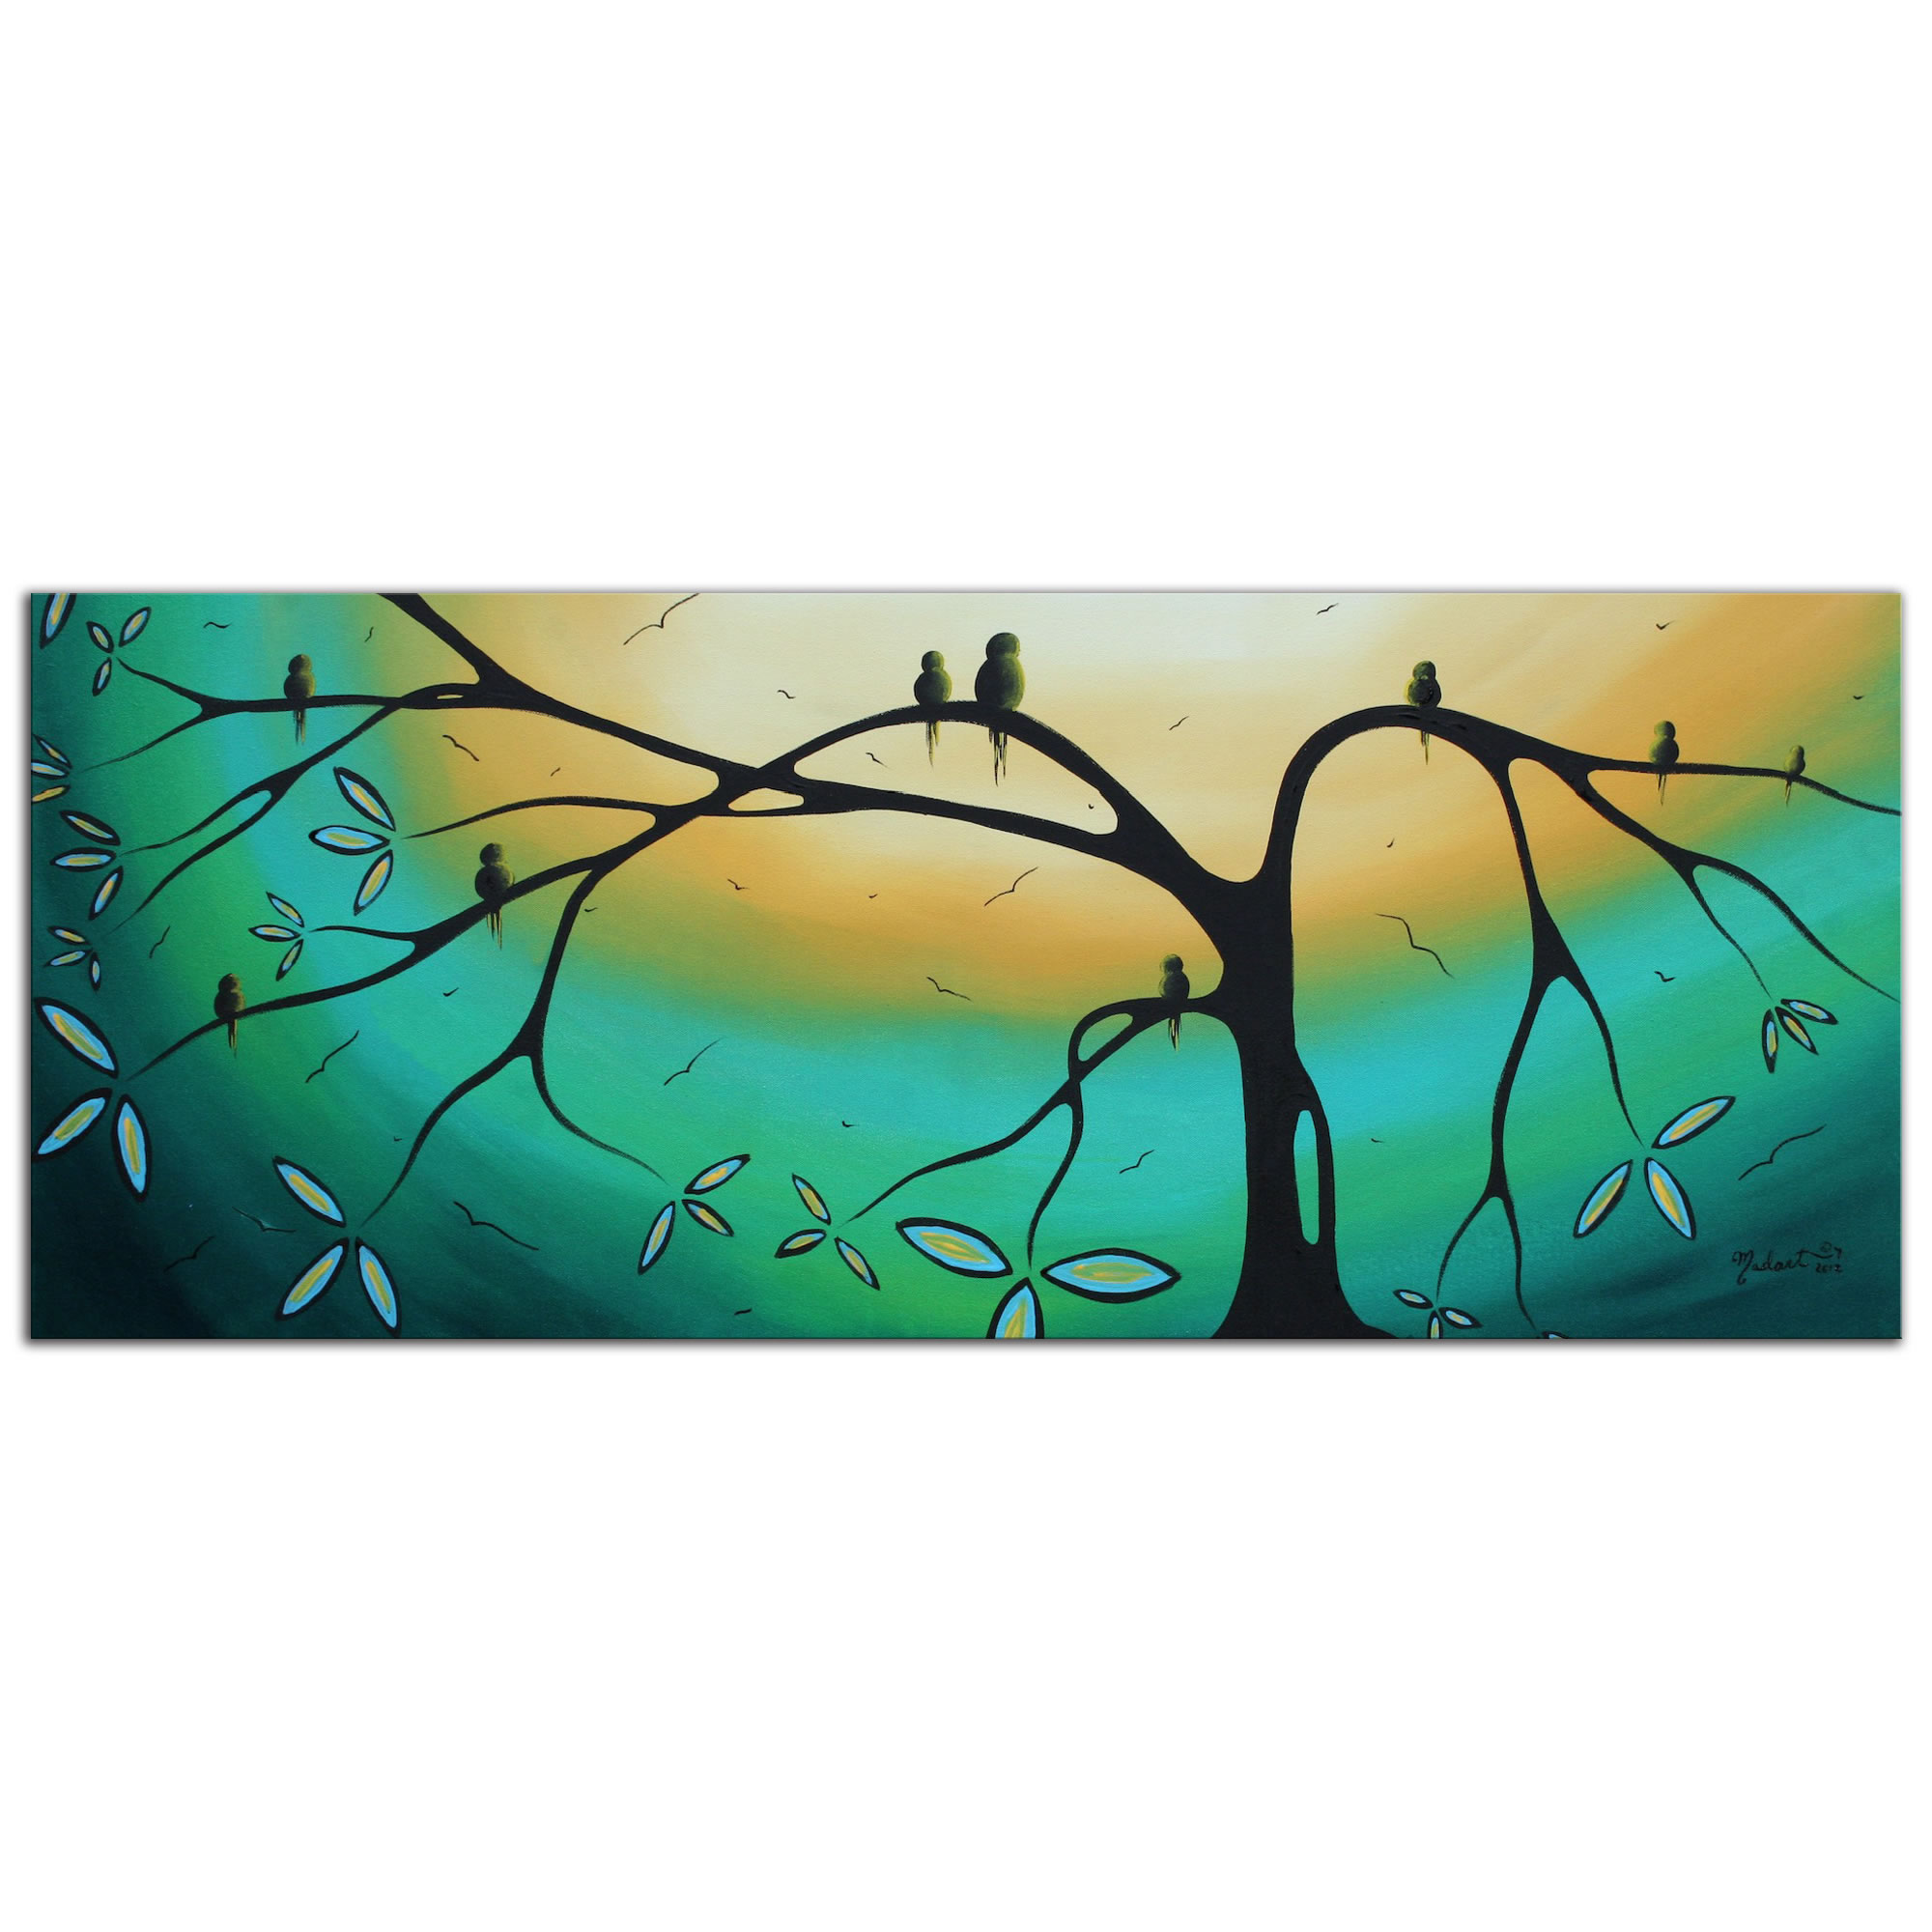 Family Perch - Abstract Painting Print by Megan Duncanson